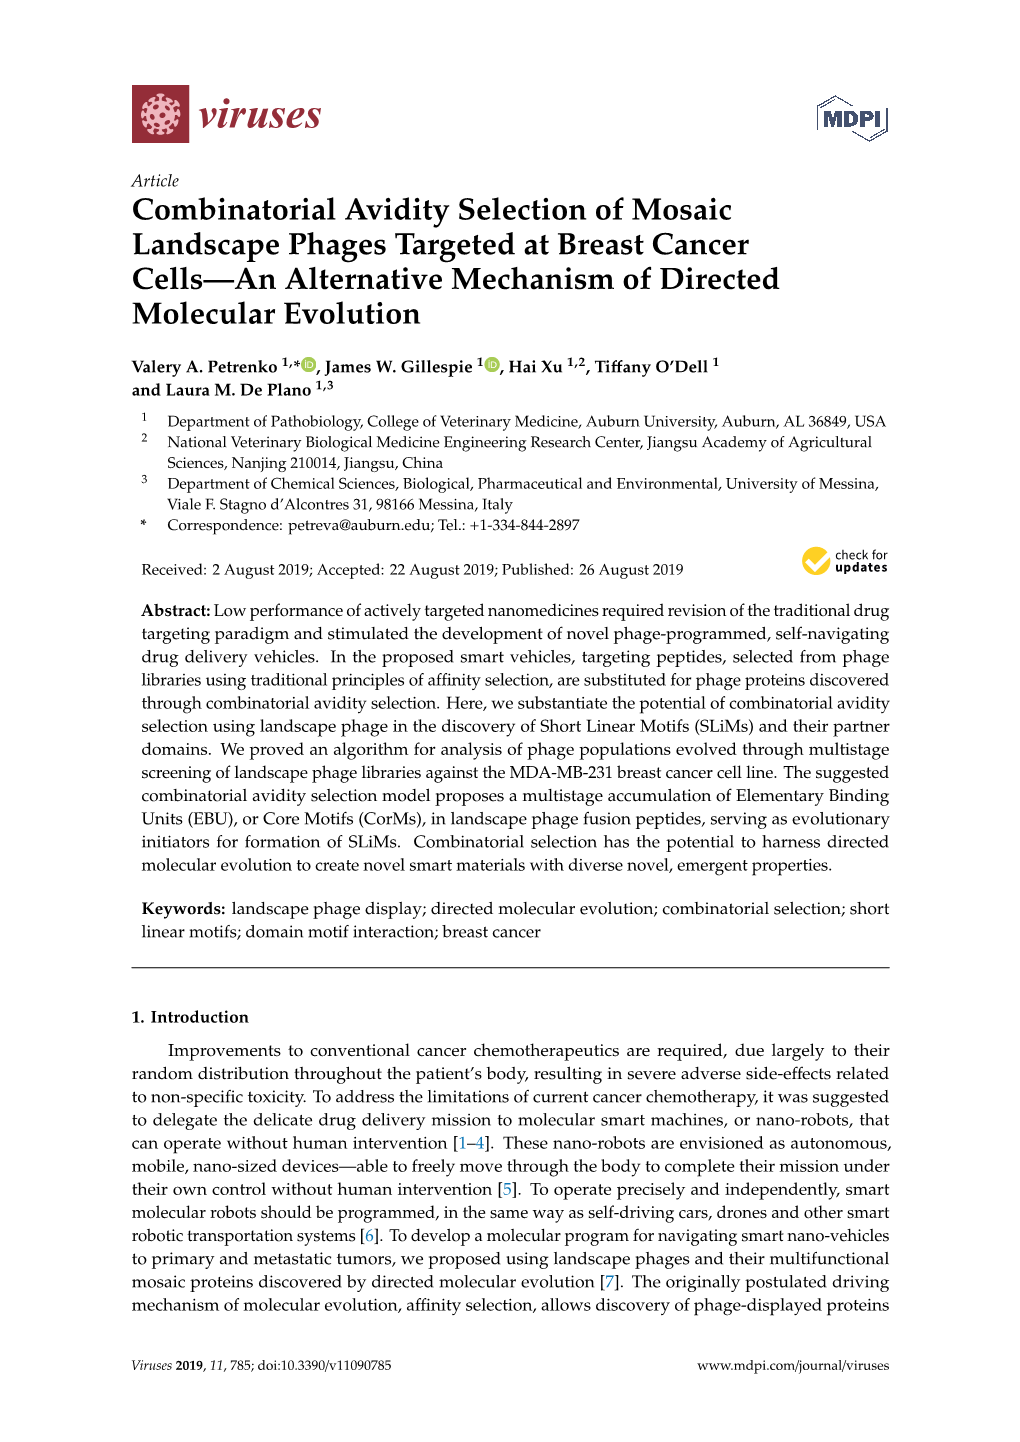 Combinatorial Avidity Selection of Mosaic Landscape Phages Targeted at Breast Cancer Cells—An Alternative Mechanism of Directed Molecular Evolution